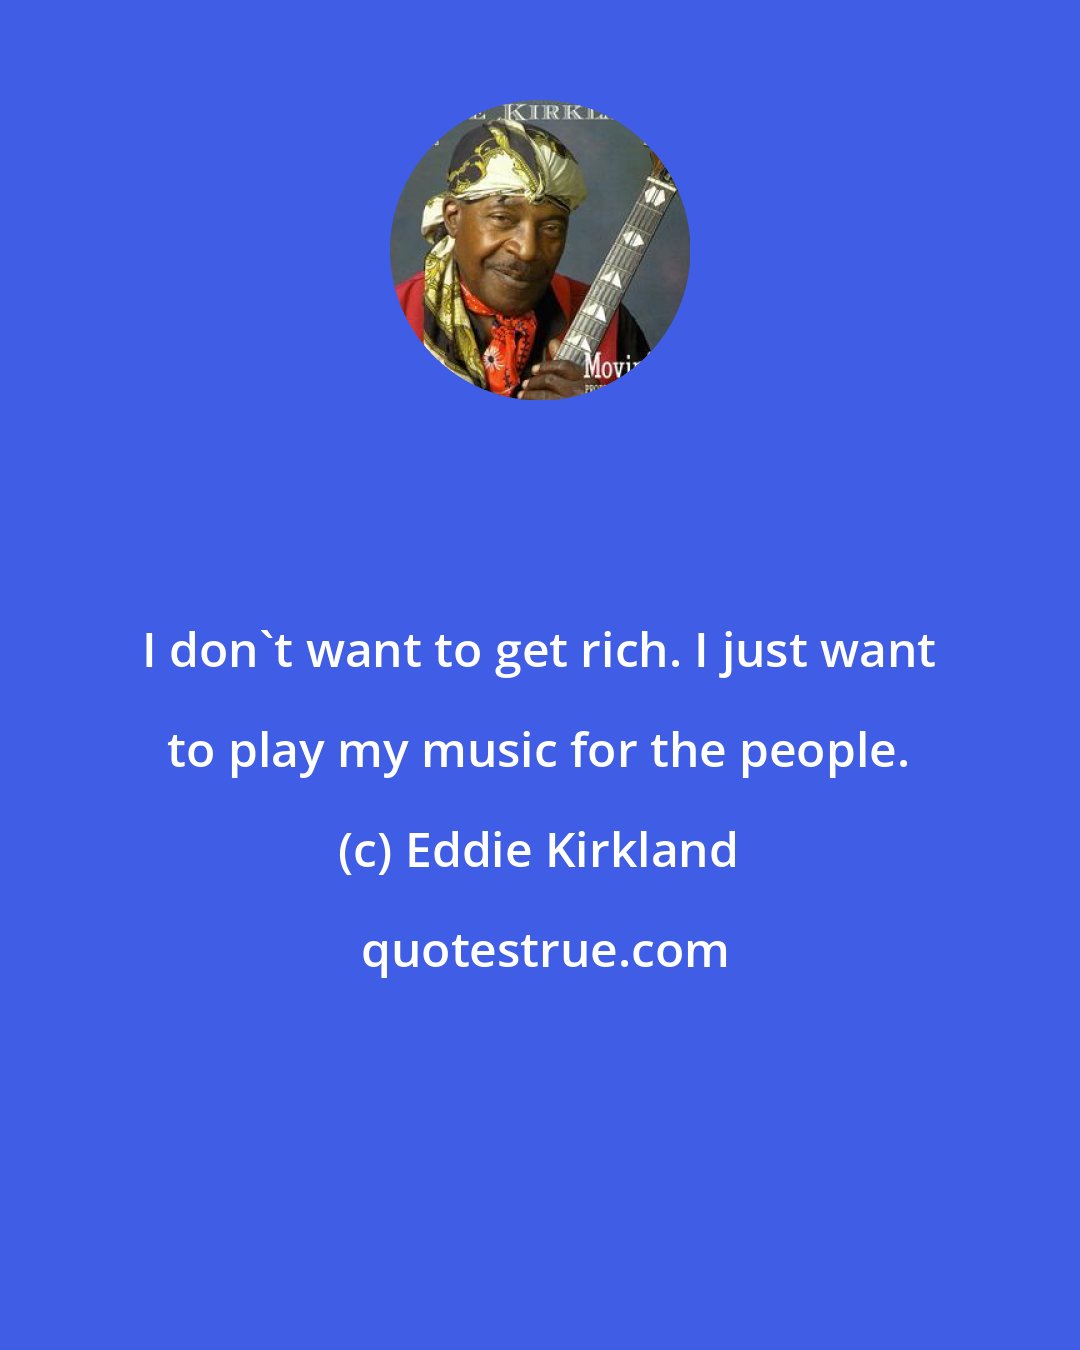 Eddie Kirkland: I don't want to get rich. I just want to play my music for the people.